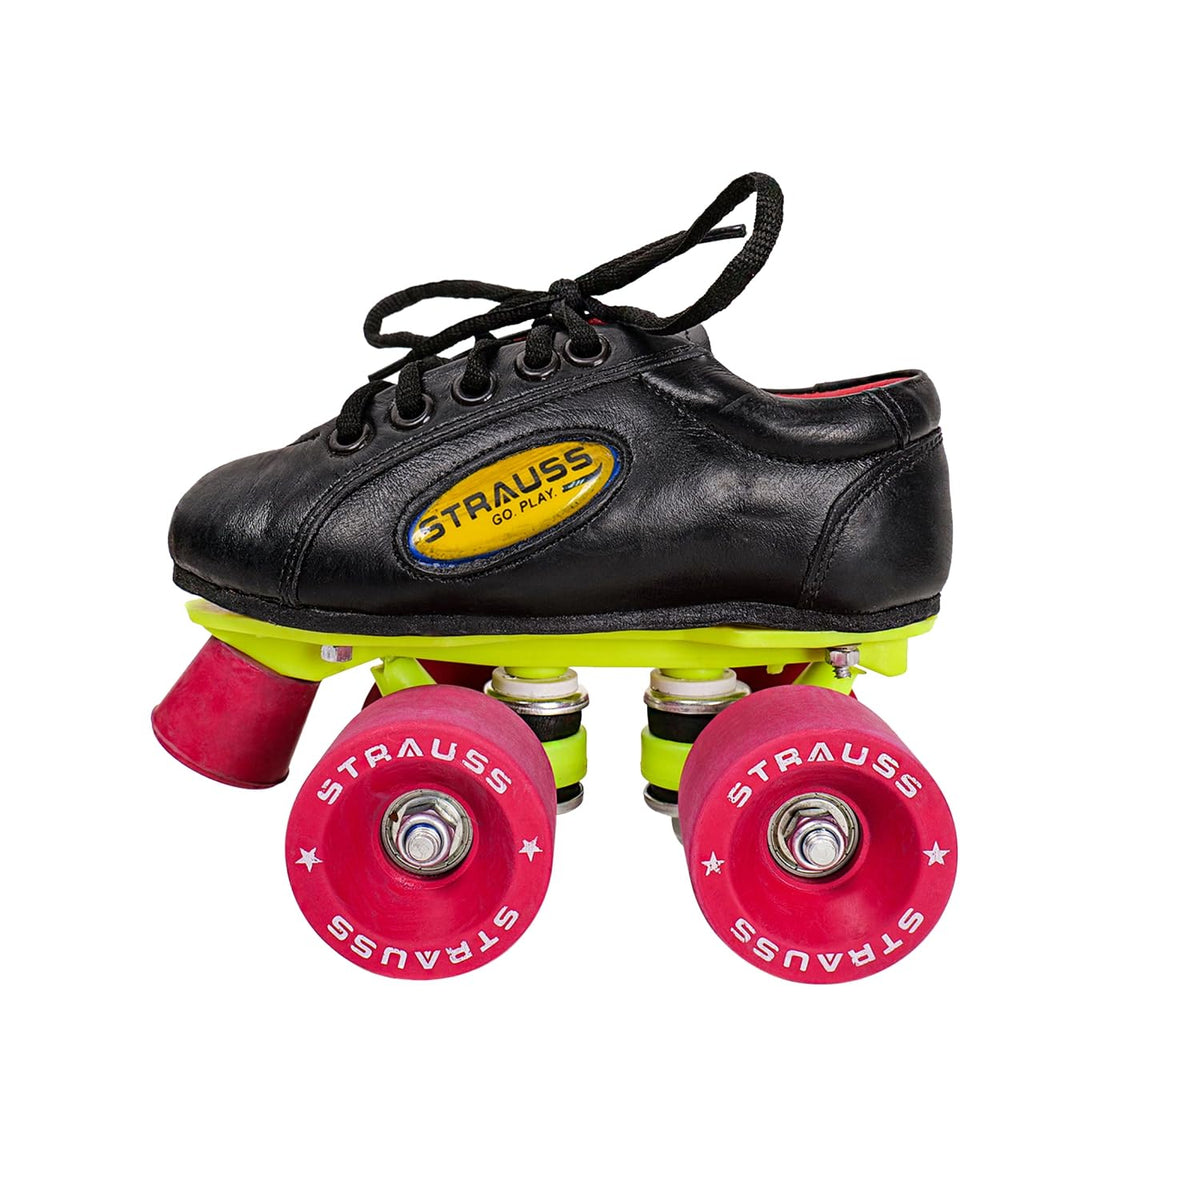 STRAUSS Gripper Skating Shoes | Fixed Body Roller Skates | Shoe Skate With Rubber Wheel |Ideal For Boys, Girls and Kids |Suitable For All Skill Level | Ideal For Kids (11-12 Years) , Size-4,(Red/Black)